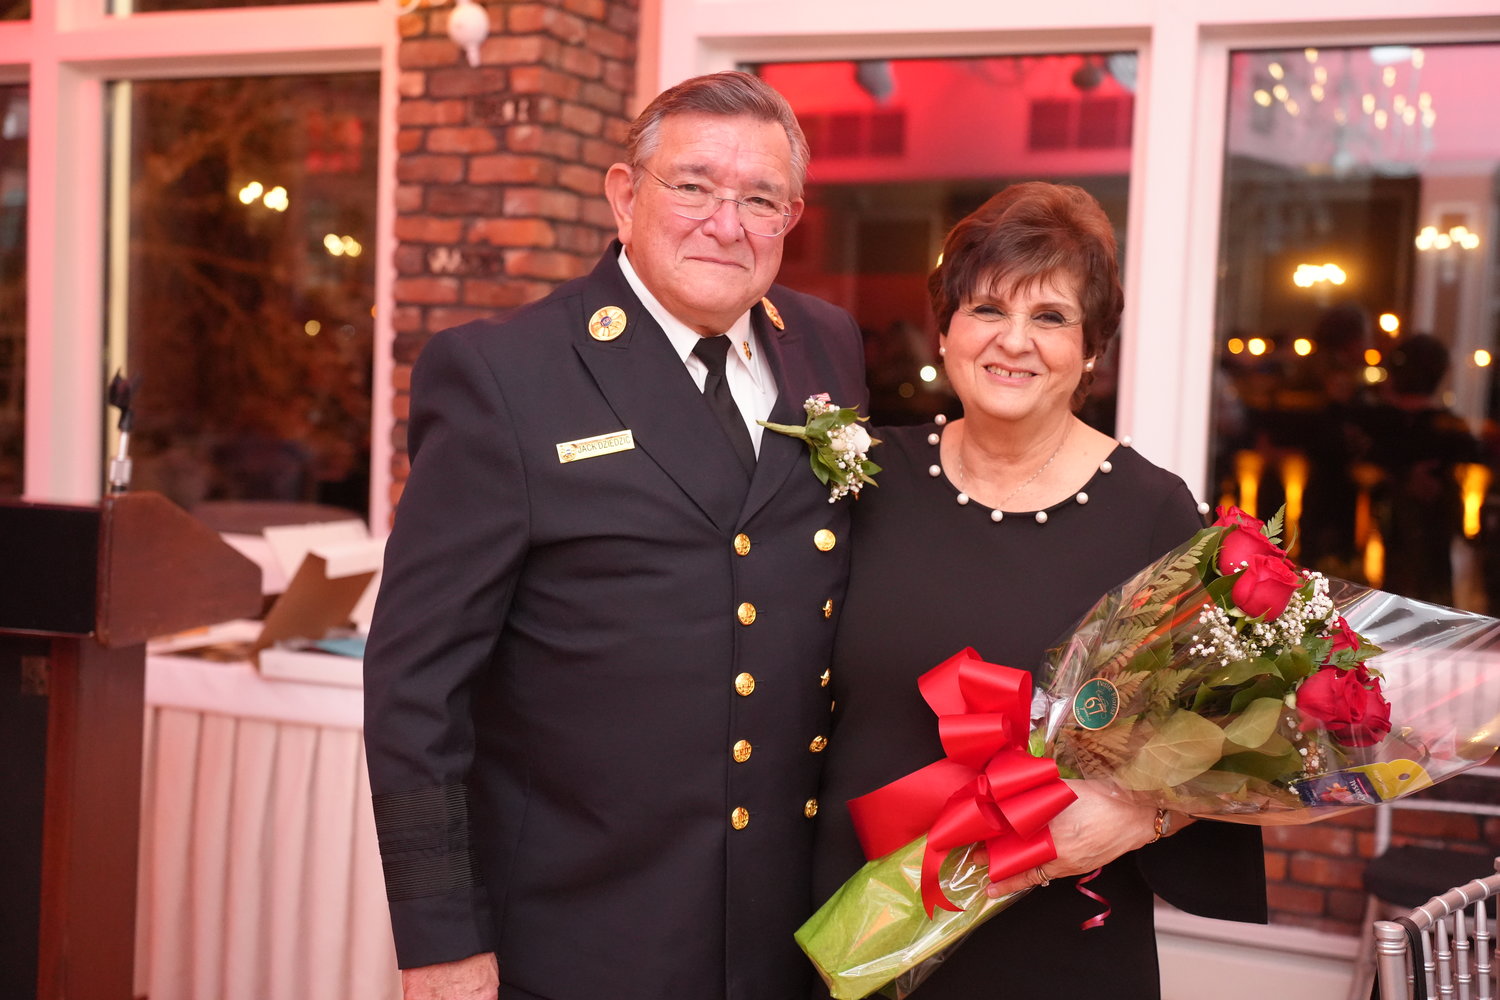 Jack Dziedzic, ex-captain and a trustee for Merrick Hook and Ladder Company No. 1, was honored this weekend for 50 years of service to the community. Dziedzic, above, with his wife, Emily.